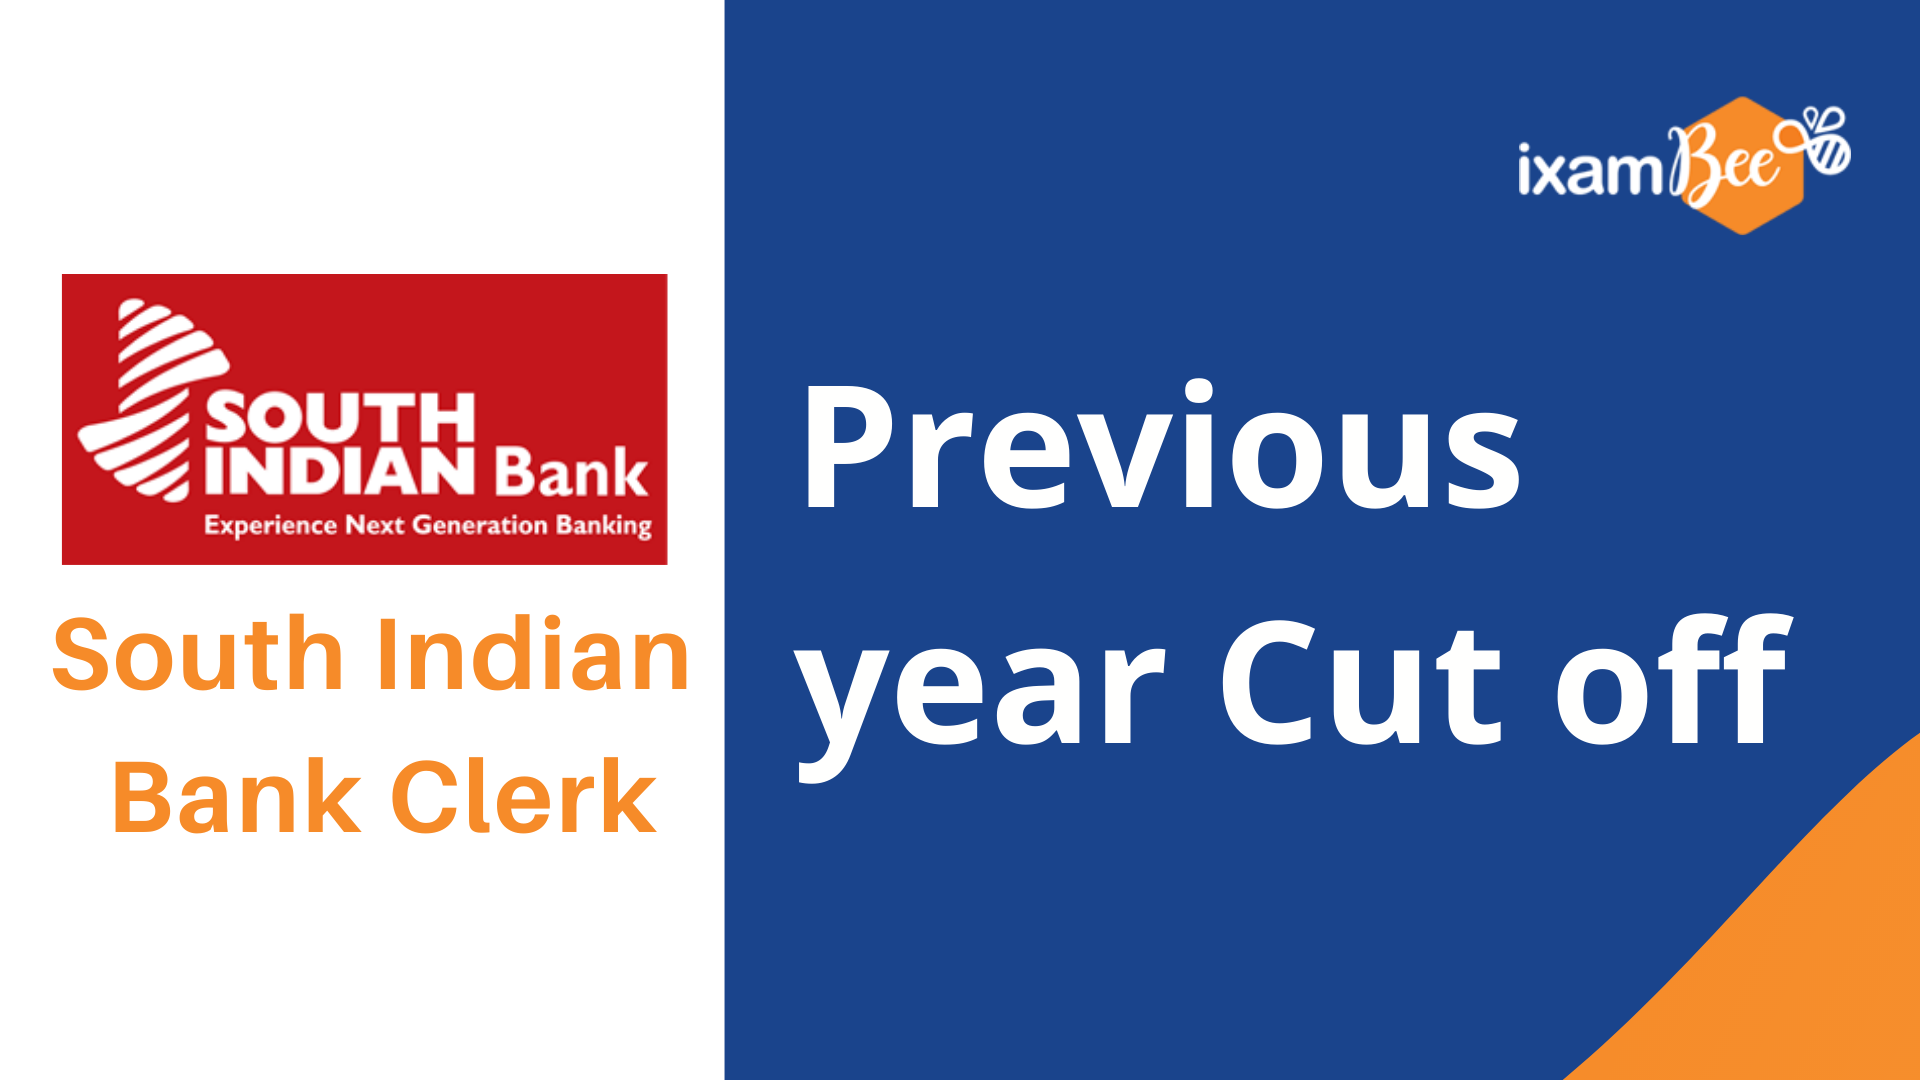 South Indian Bank Clerk Previous Year Cut-off